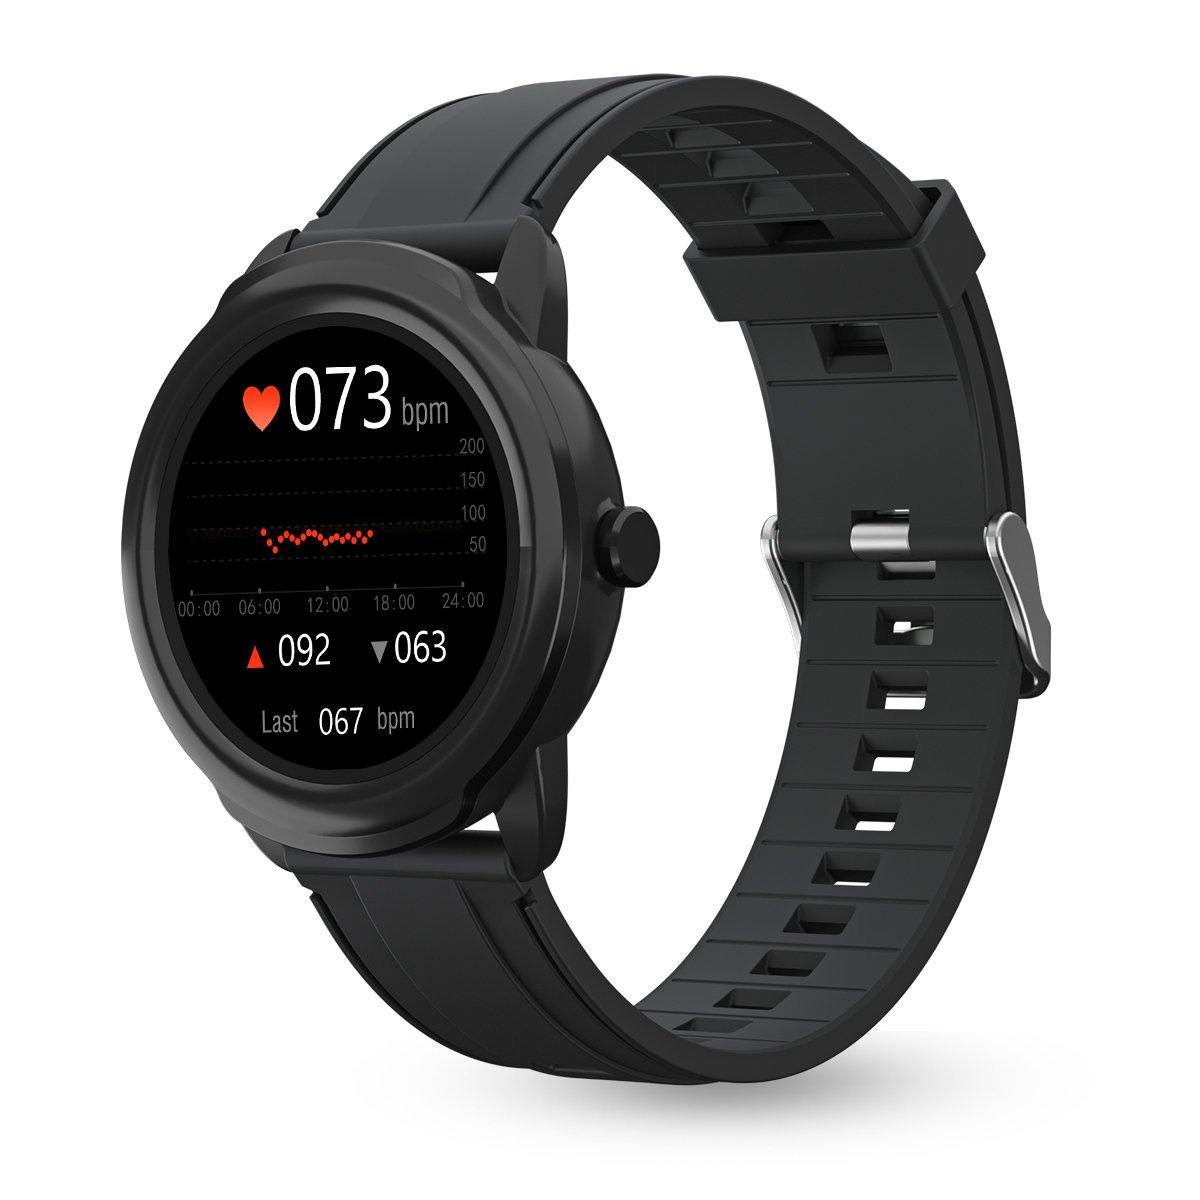 Portronics Kronos Beta with 7-day battery life and over 100 watch faces announced: Specs, Price